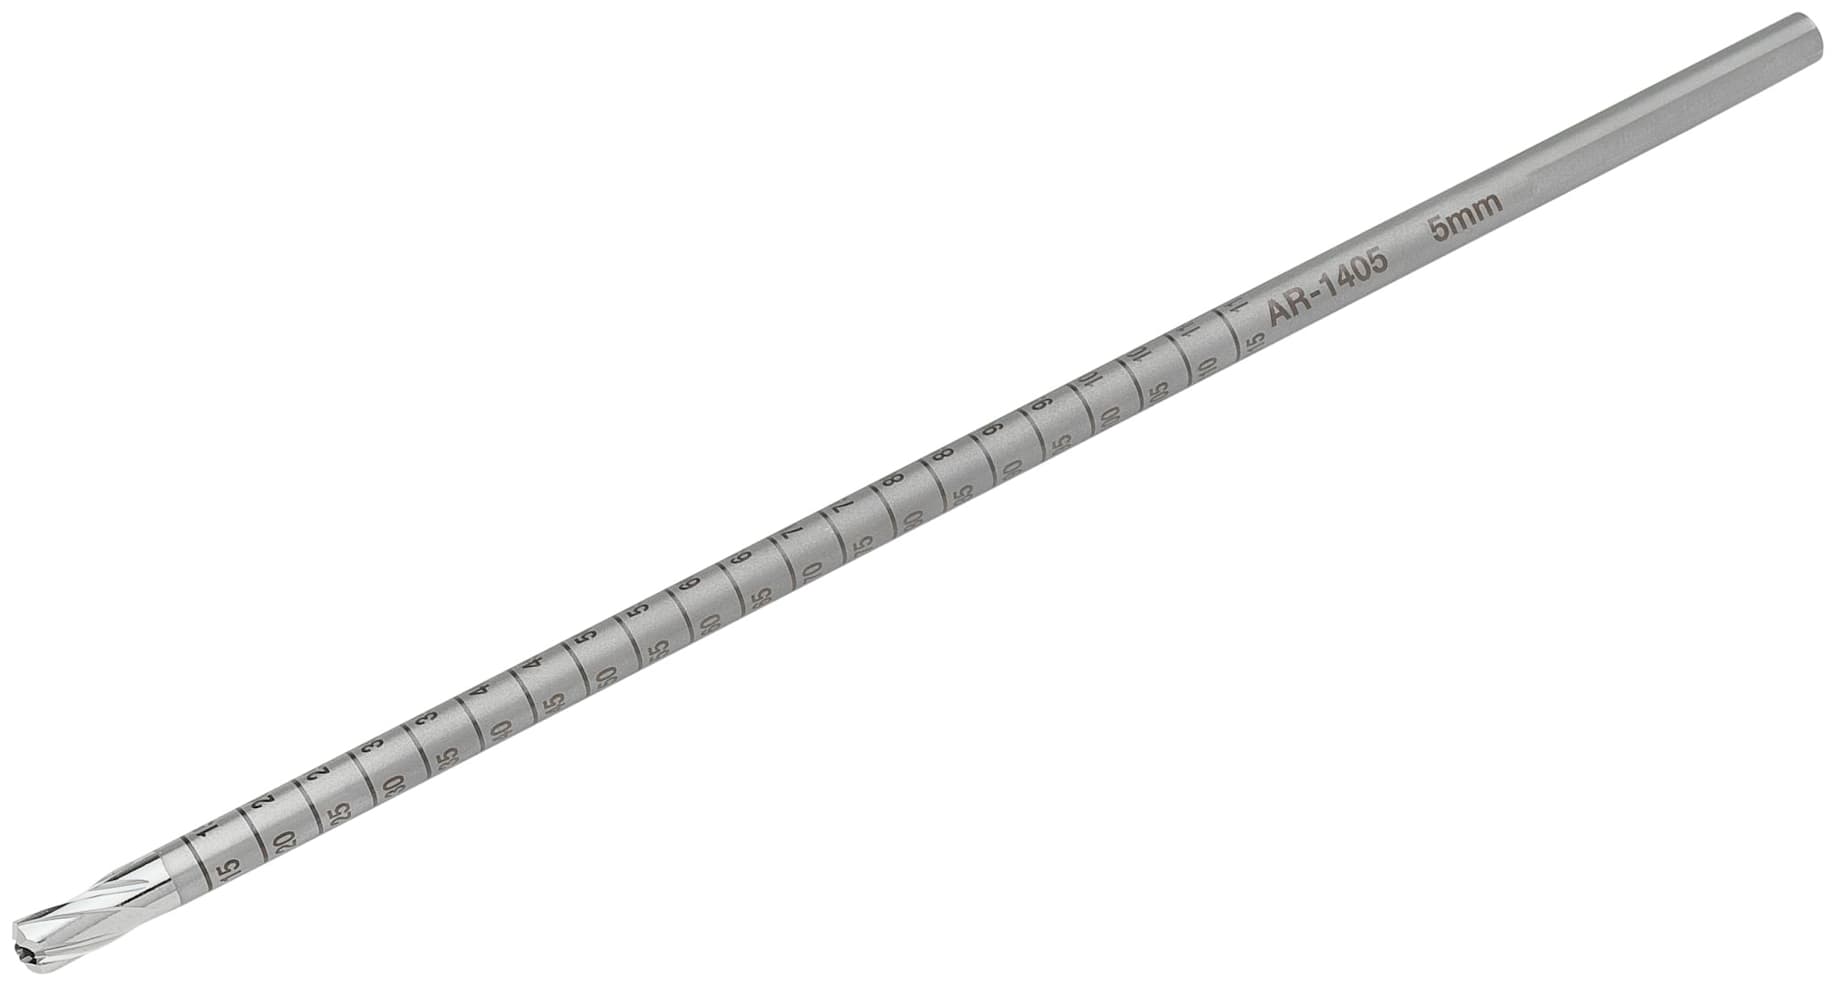 Cannulated Headed Reamer, 5 mm